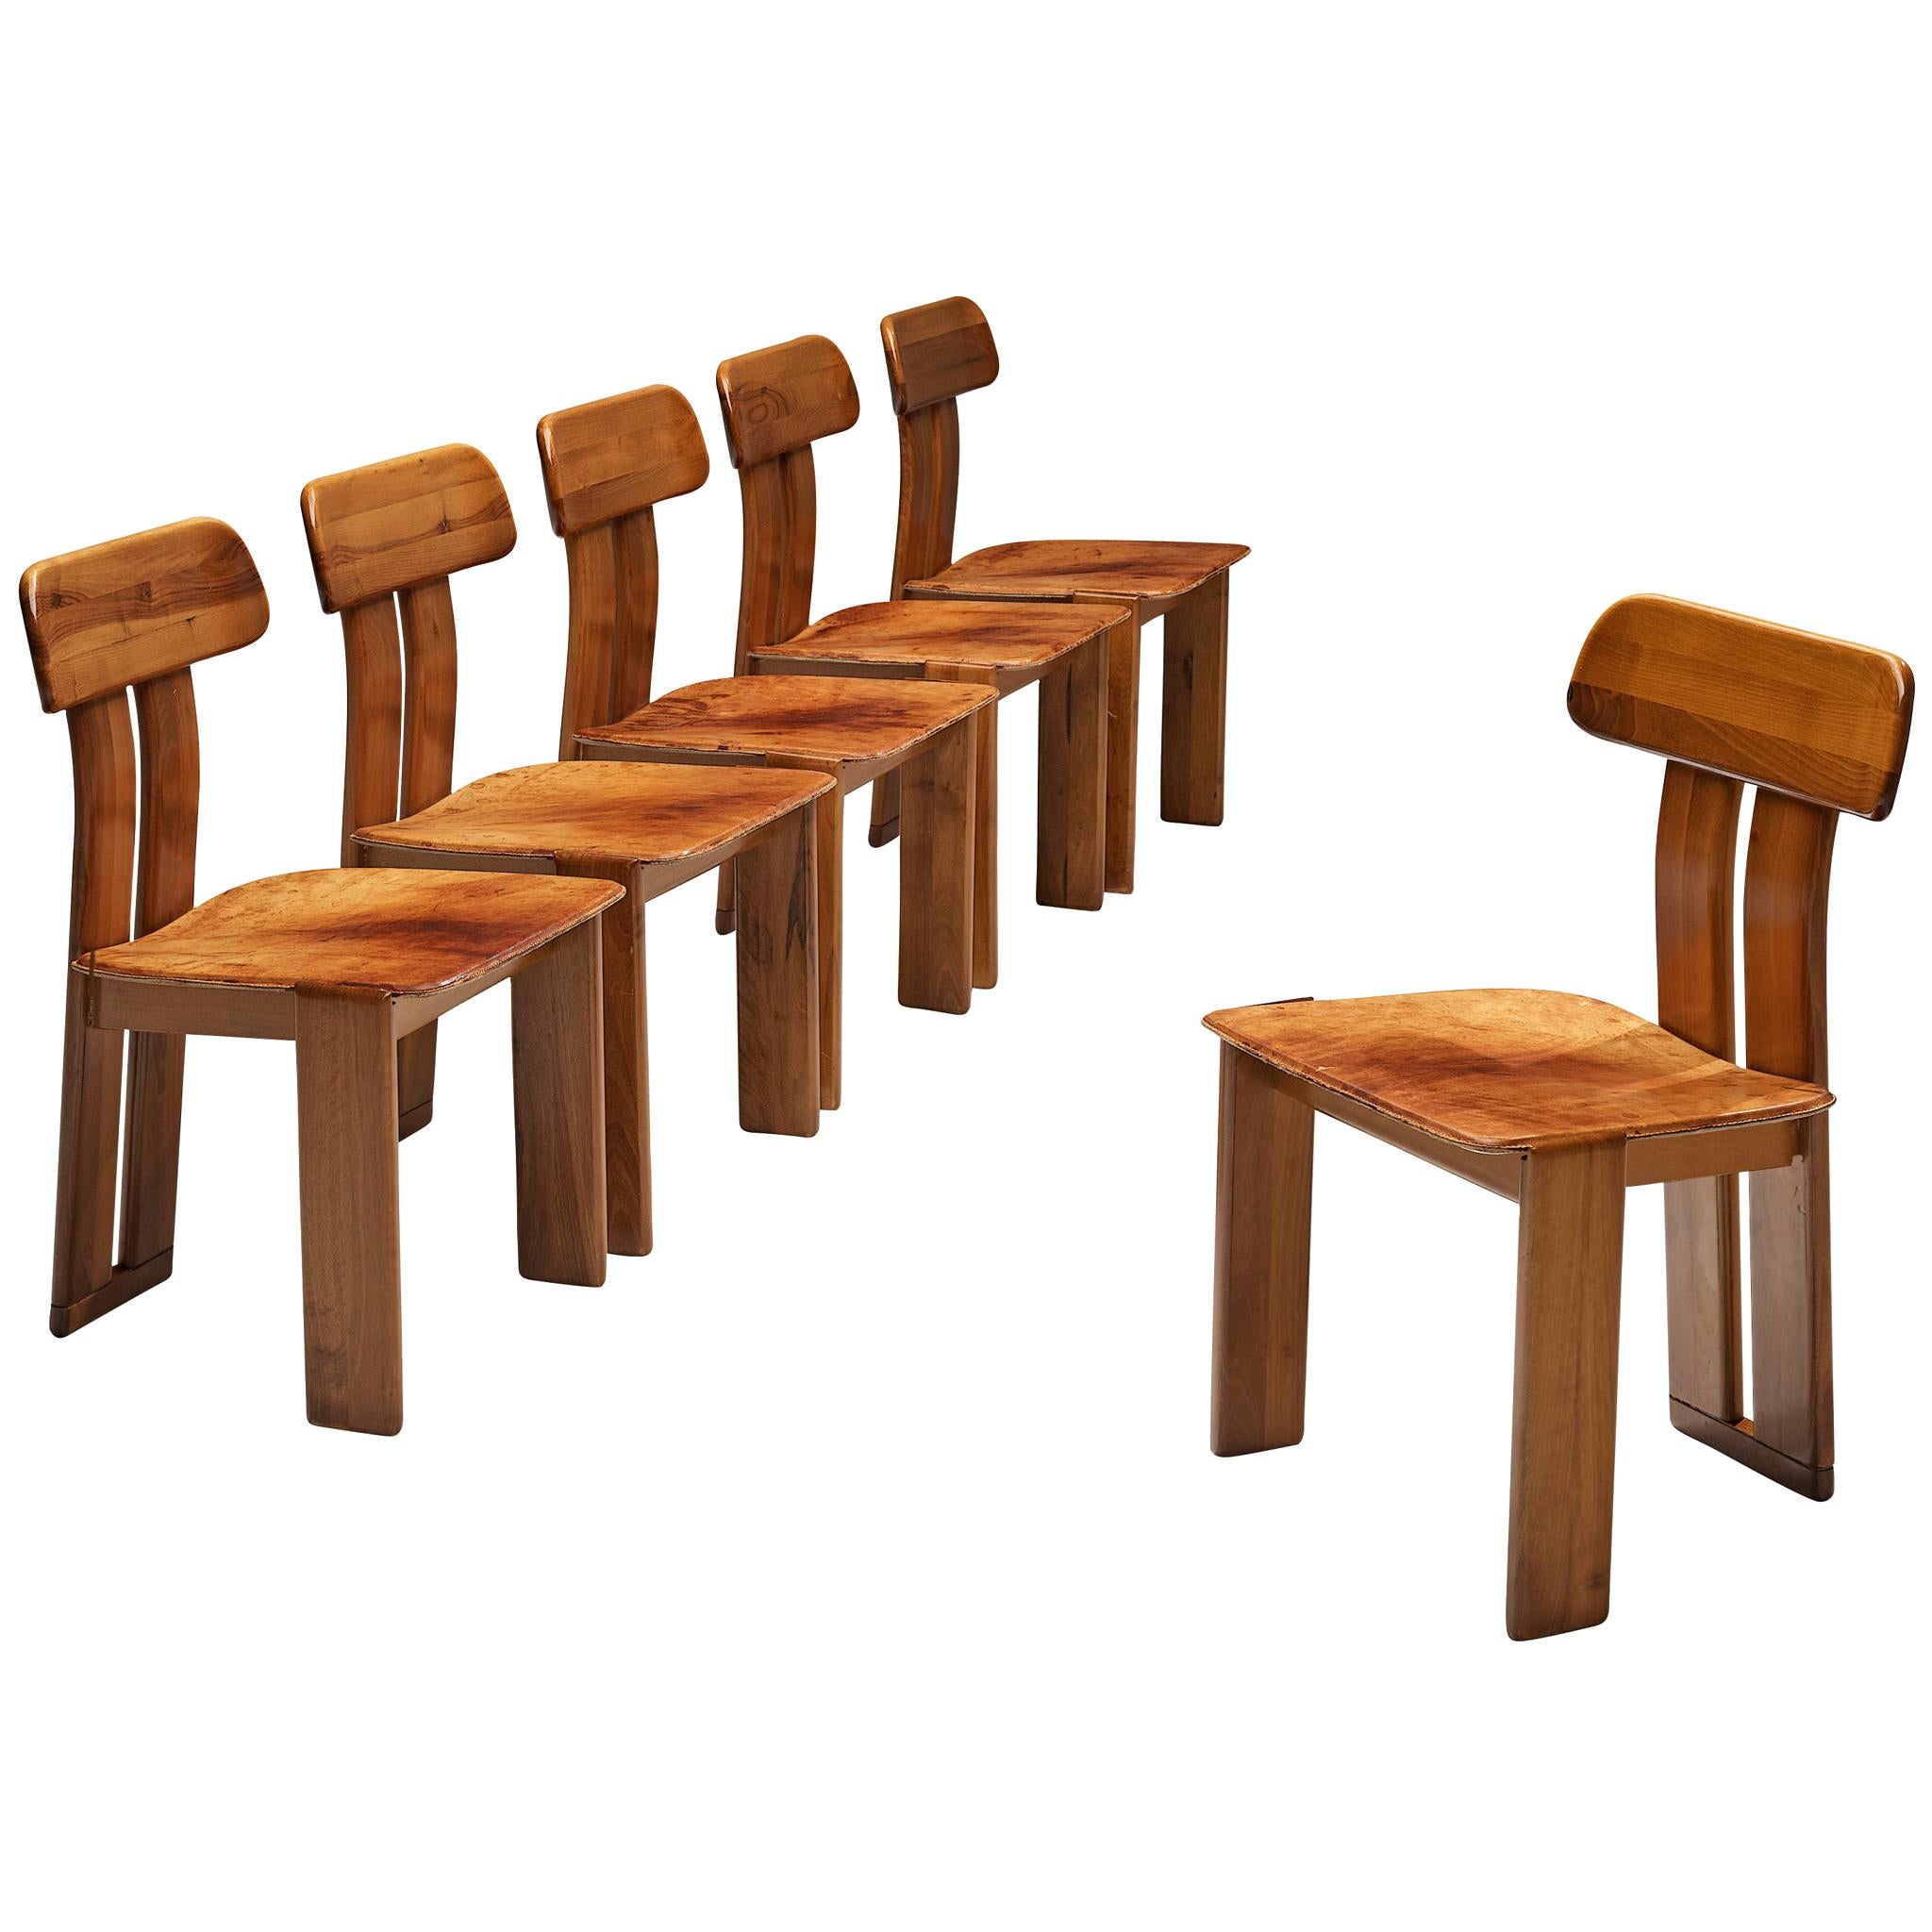 Set of Six Italian Dining Chairs by Sapporo in Cognac Leather